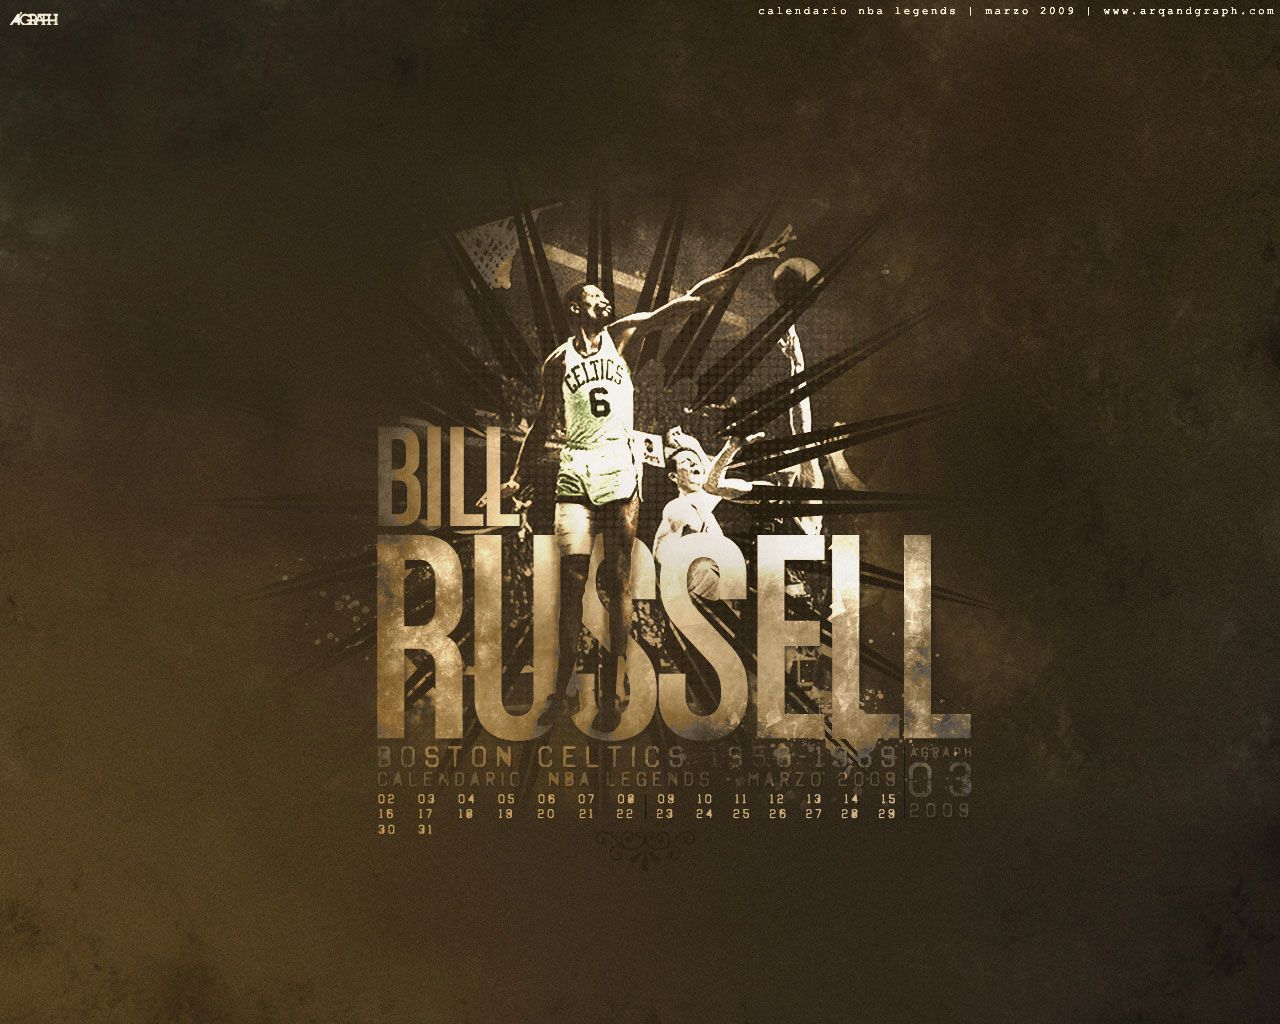 Bill Russell Basketball legend picture